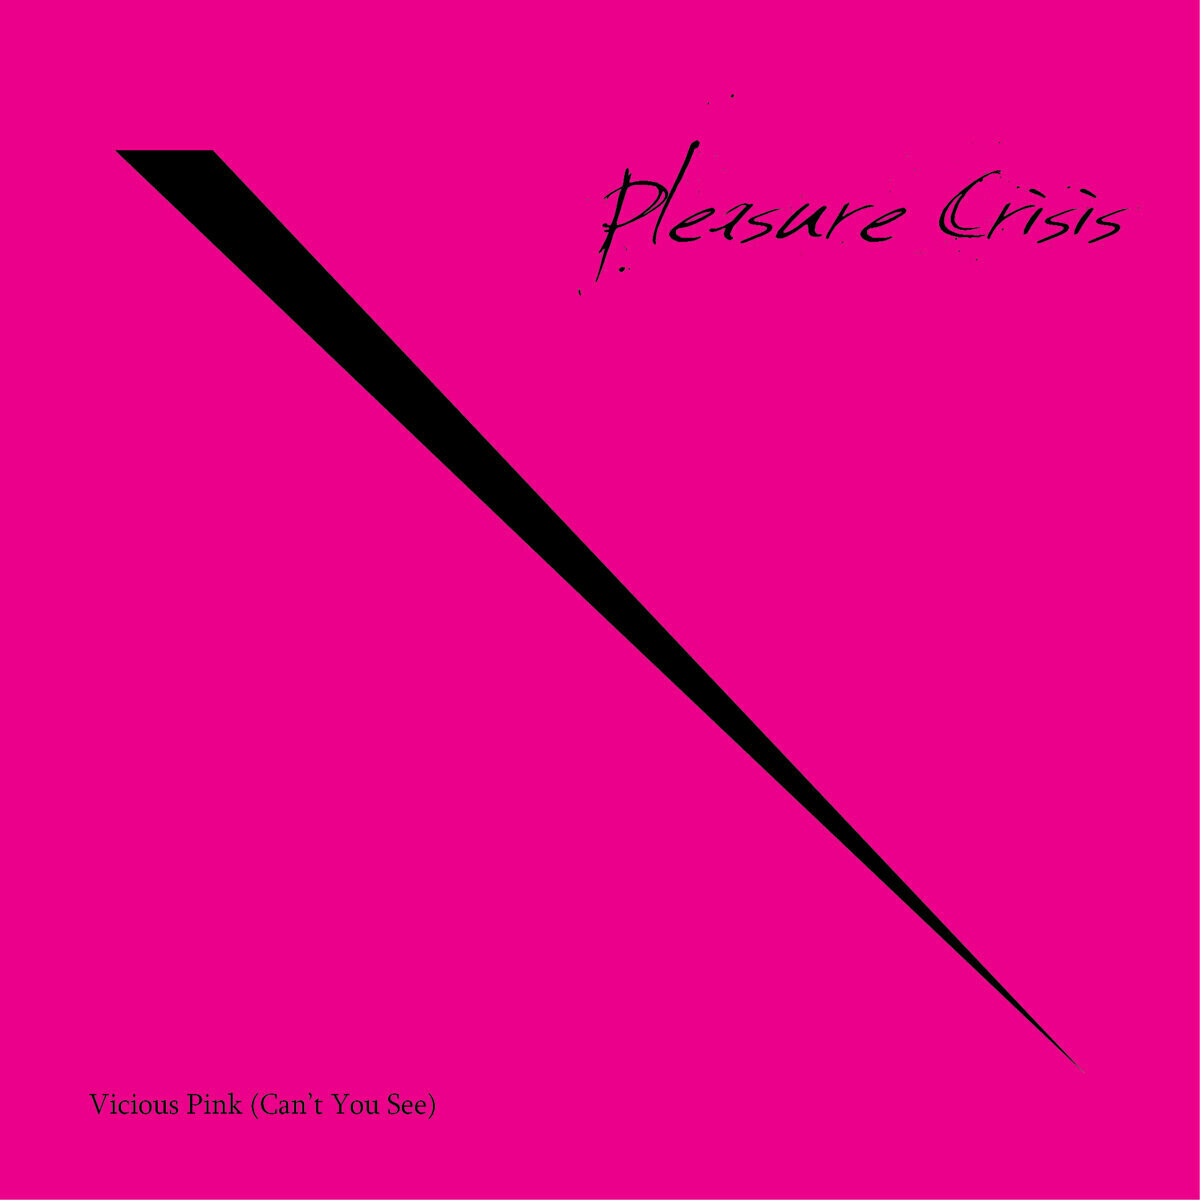 Pleasure Crisis (Can't You See  - Vicious Pink Cover)